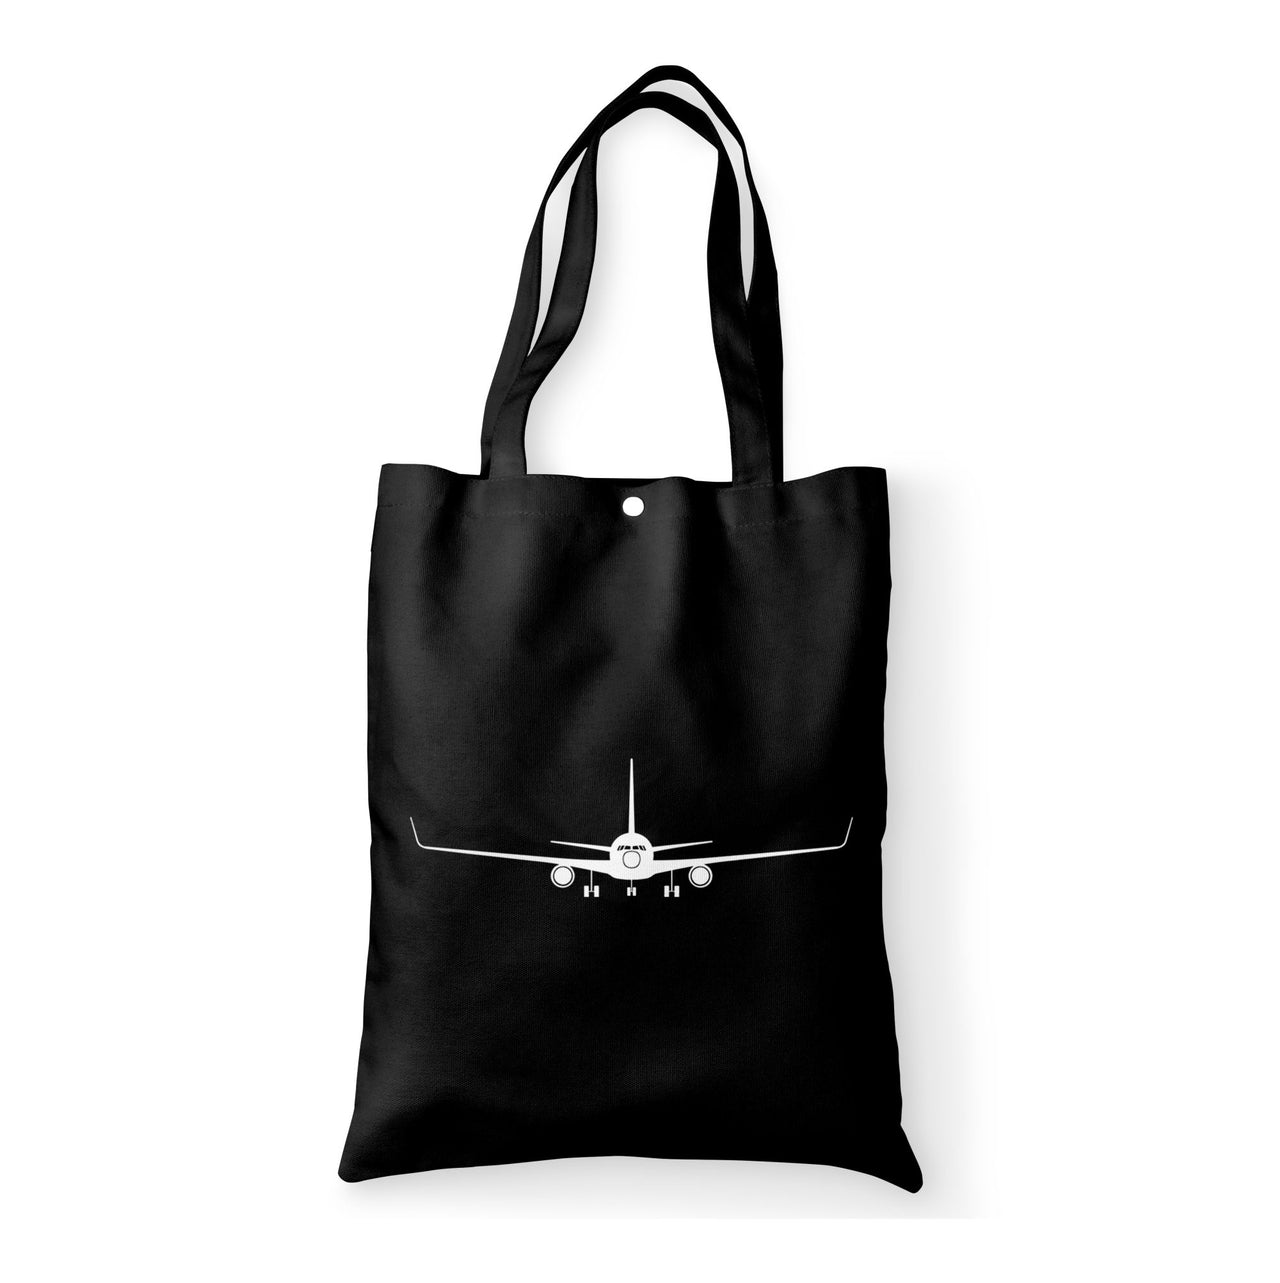 Boeing 767 Silhouette Designed Tote Bags